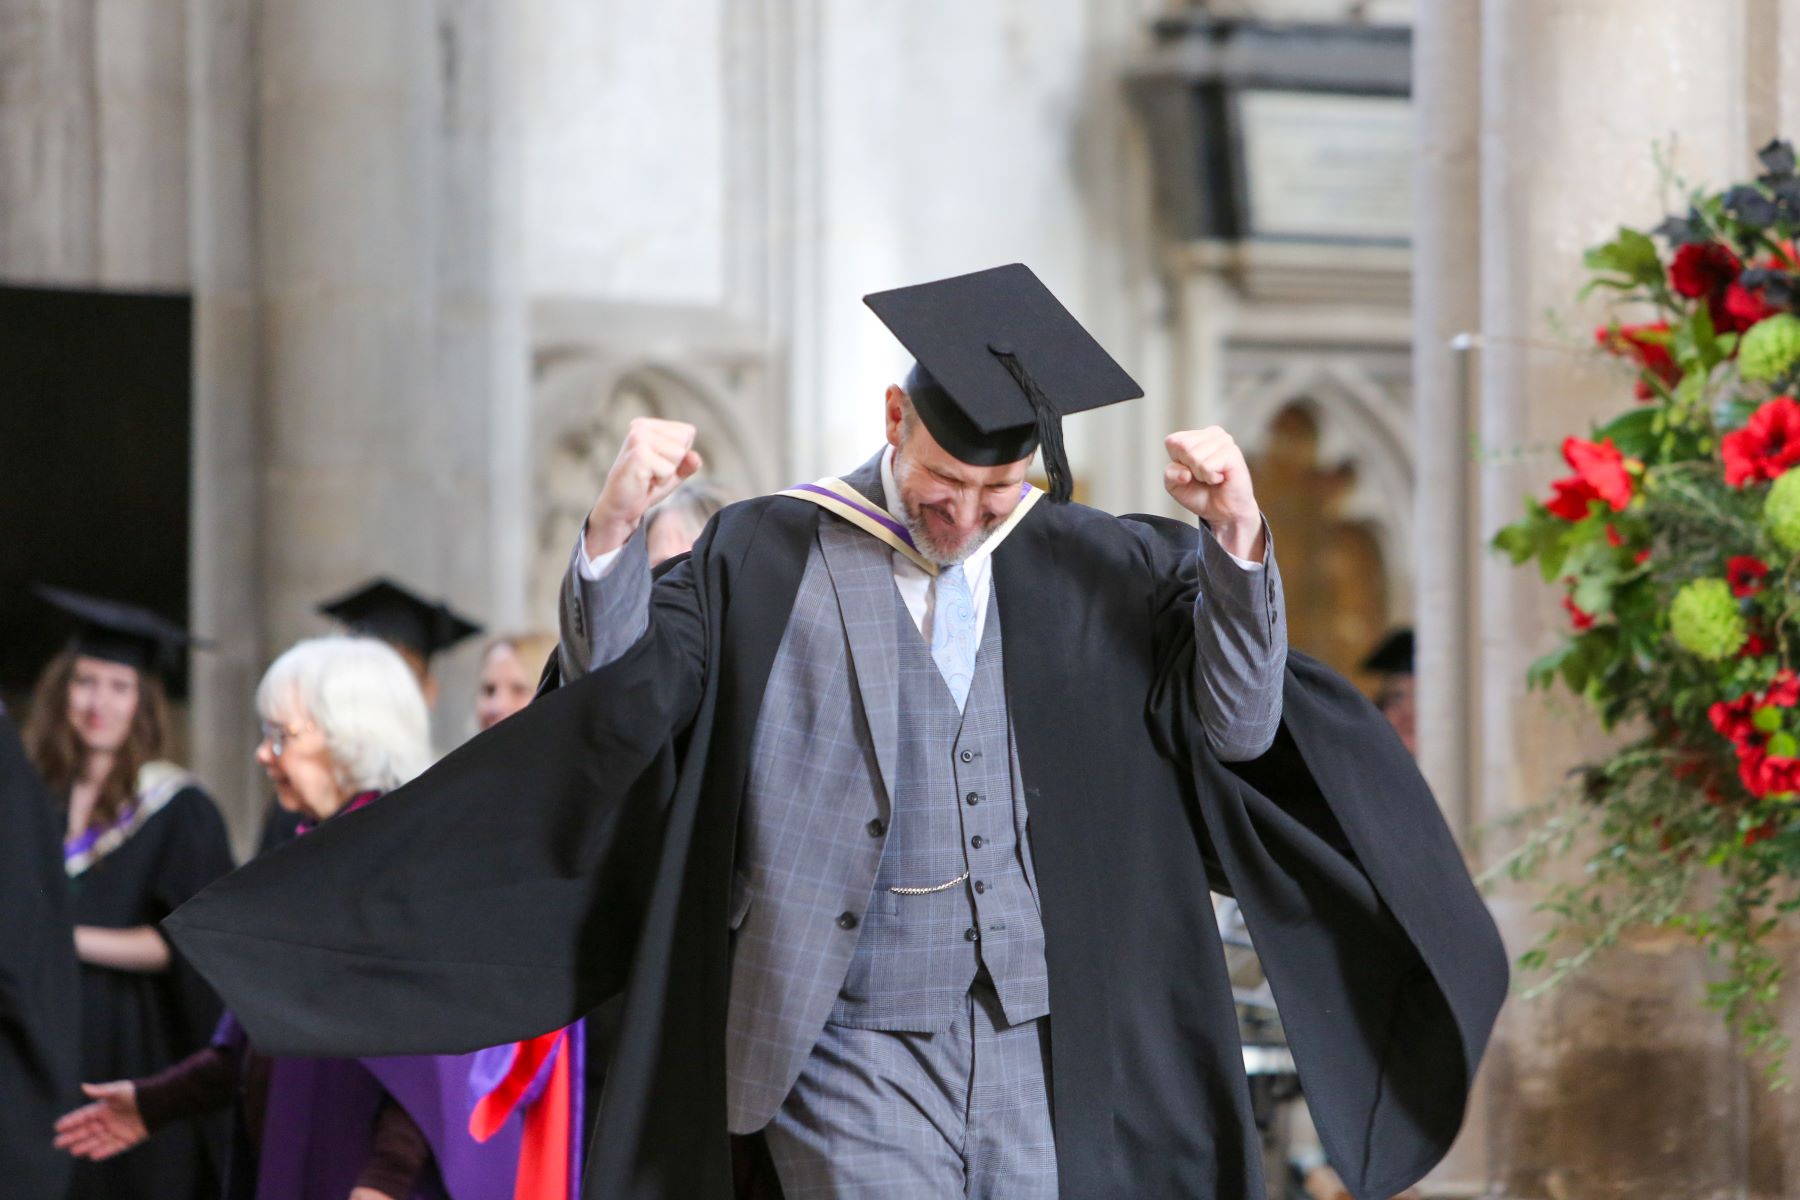 A mature student in suit, cap and gown celebrating with arms aloft